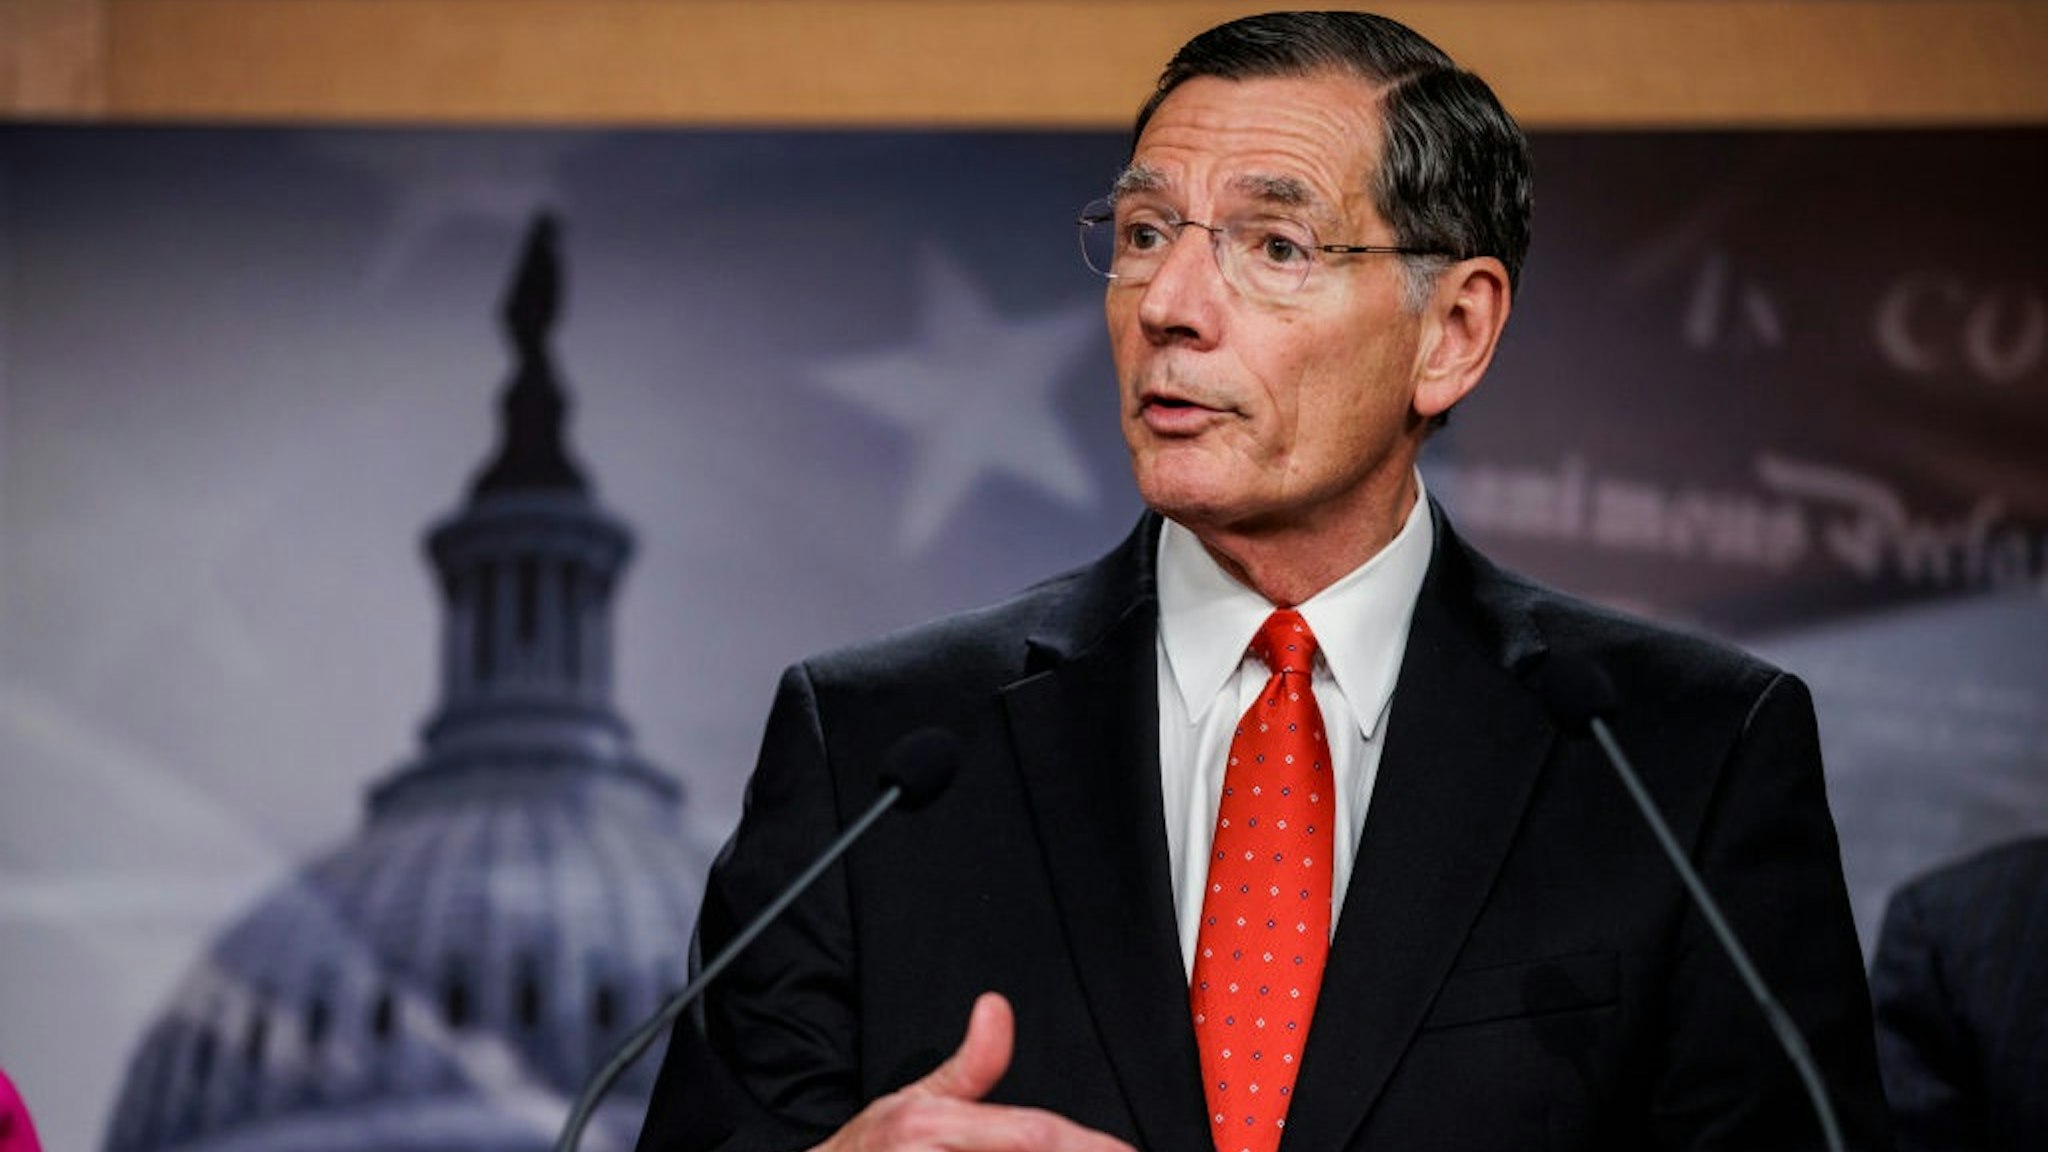 WASHINGTON, DC - OCTOBER 27: Sen. John Barrasso (R-WY) speaks alongside other Republican Senators during a press conference on rising gas an energy prices at the U.S. Capitol on October 27, 2021 in Washington, DC.